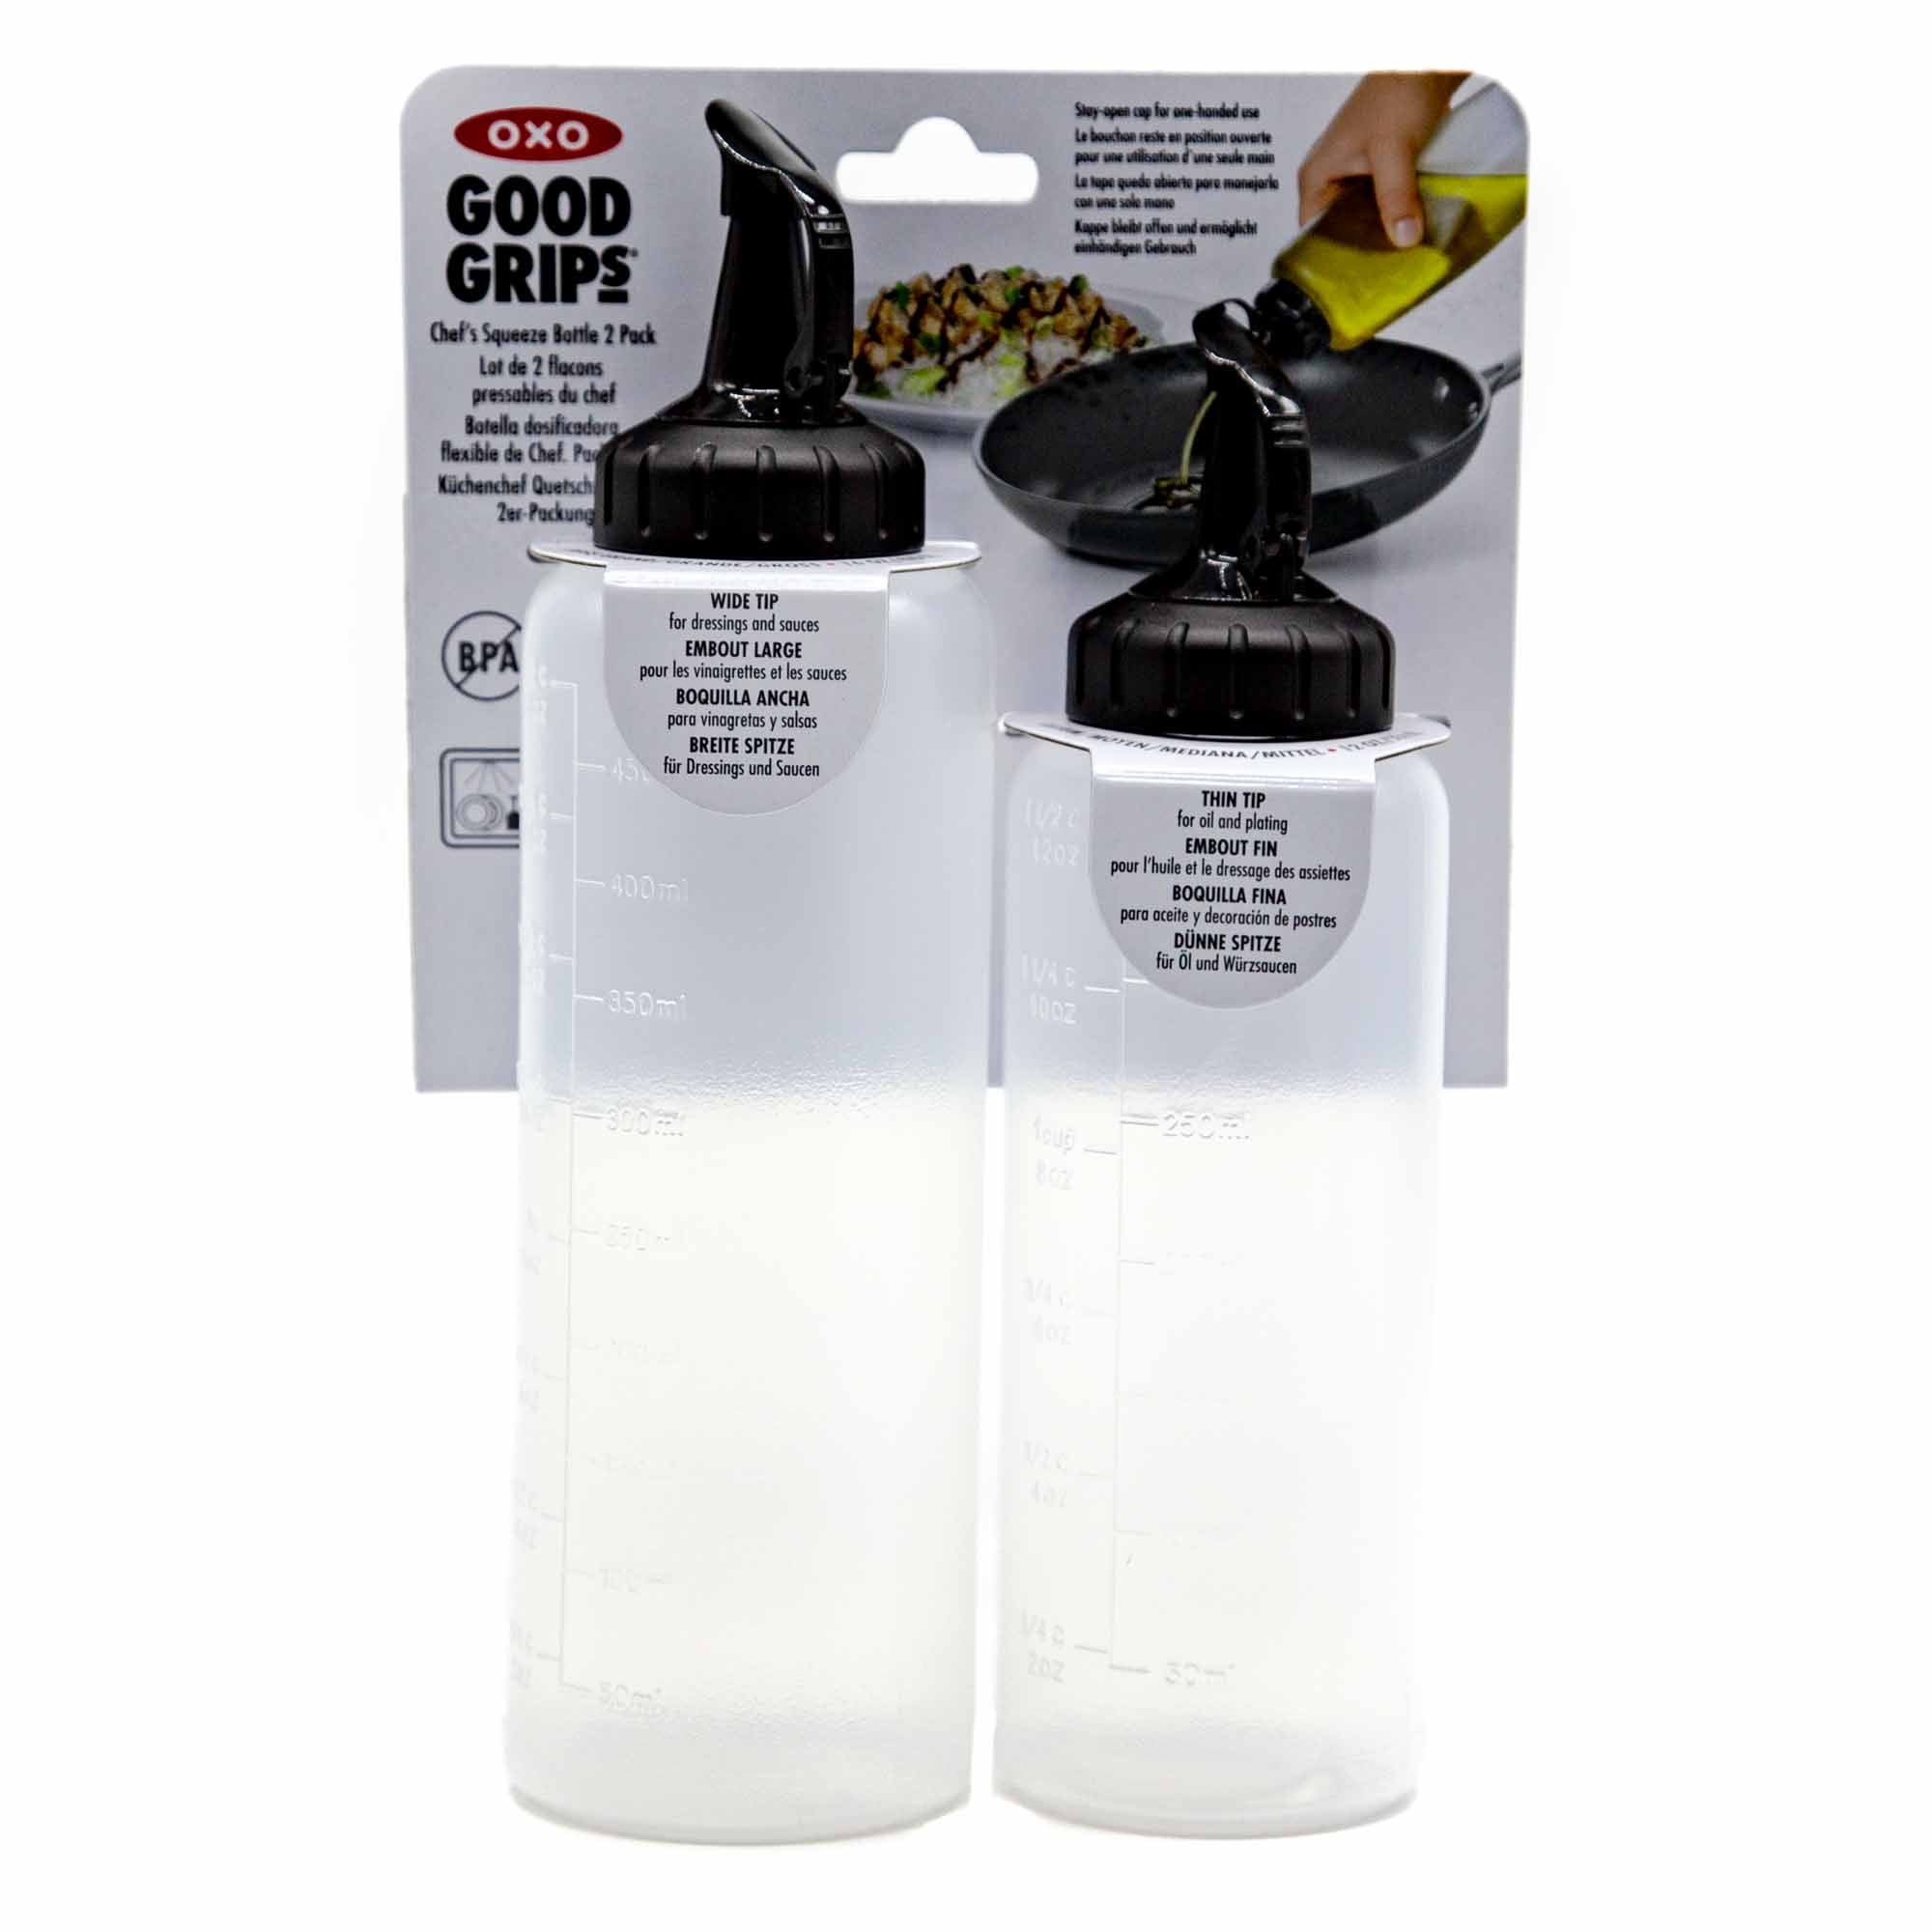 OXO Good Grips On-The-Go Silicone Squeeze Bottle (Set of 2) - Winestuff